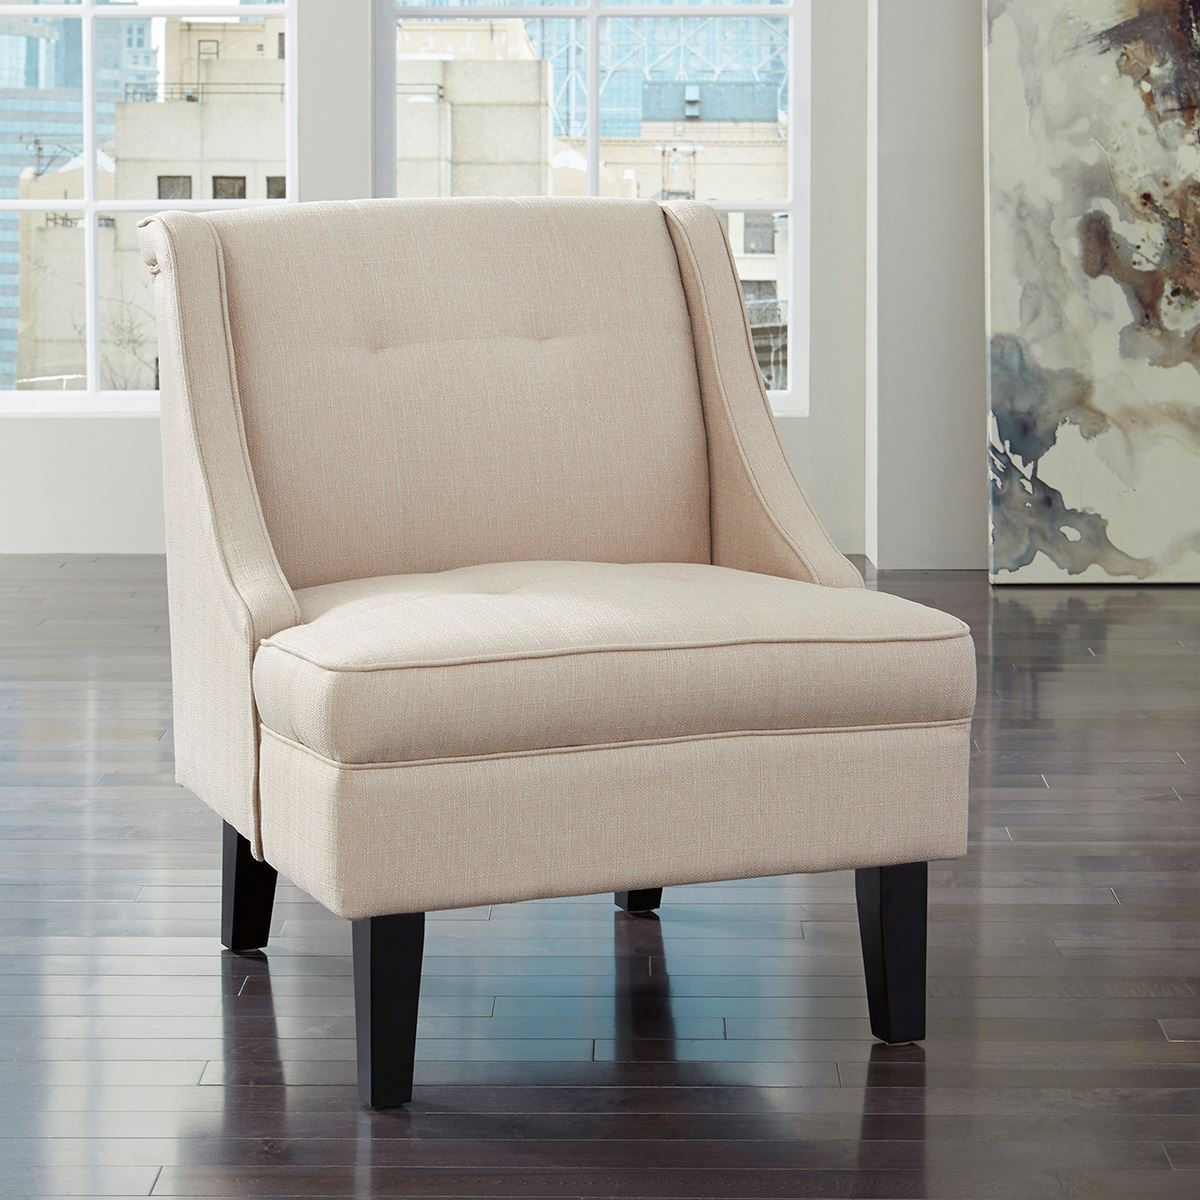 Clarinda Accent Chair in Cream | Living Room Chairs | Lifestyle